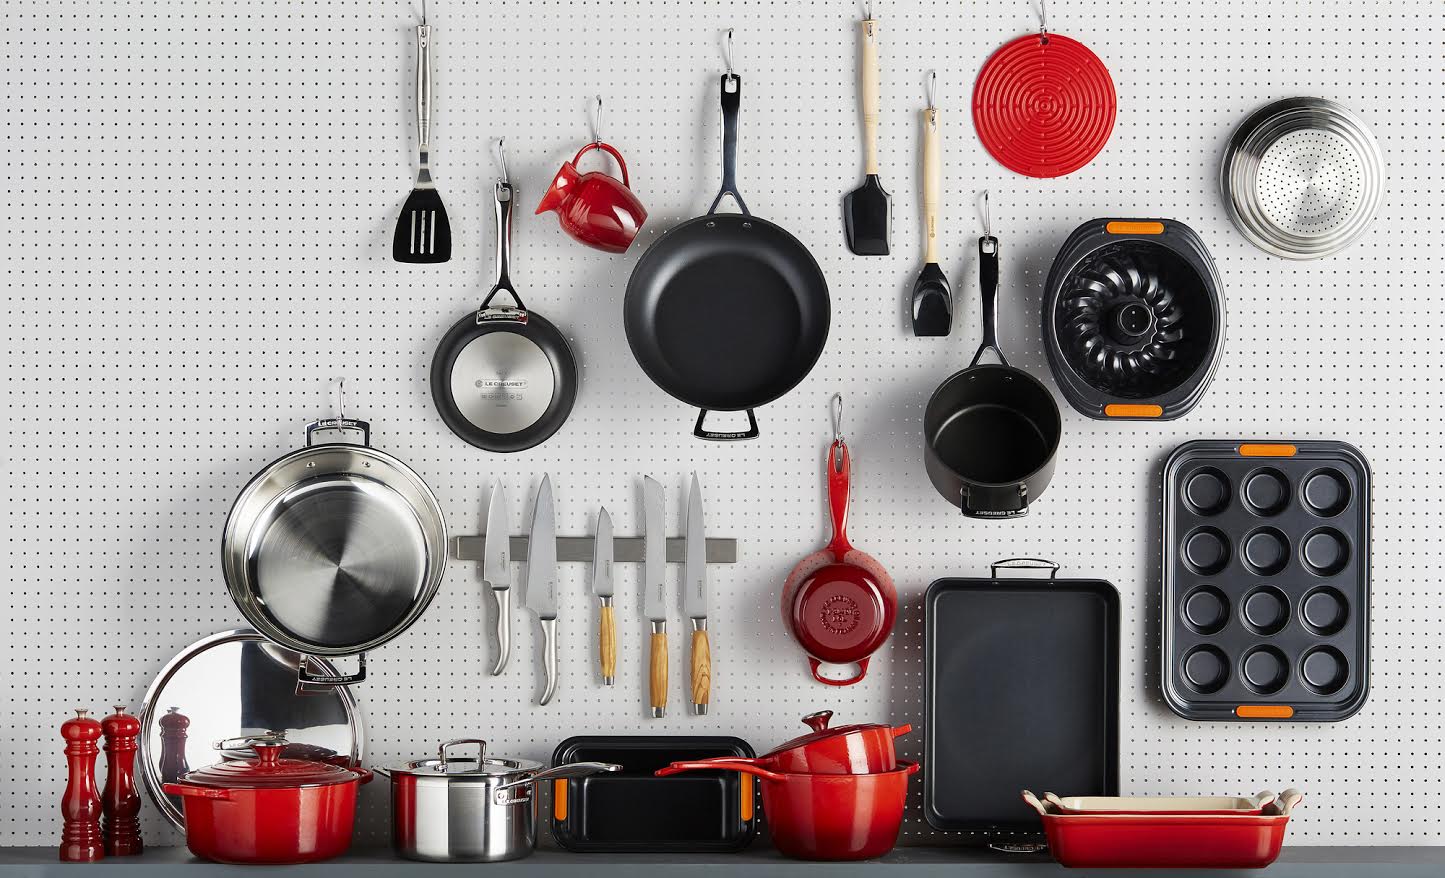 LeCreuset’s Contemporary Kitchen: Transforming Your Cooking Experience